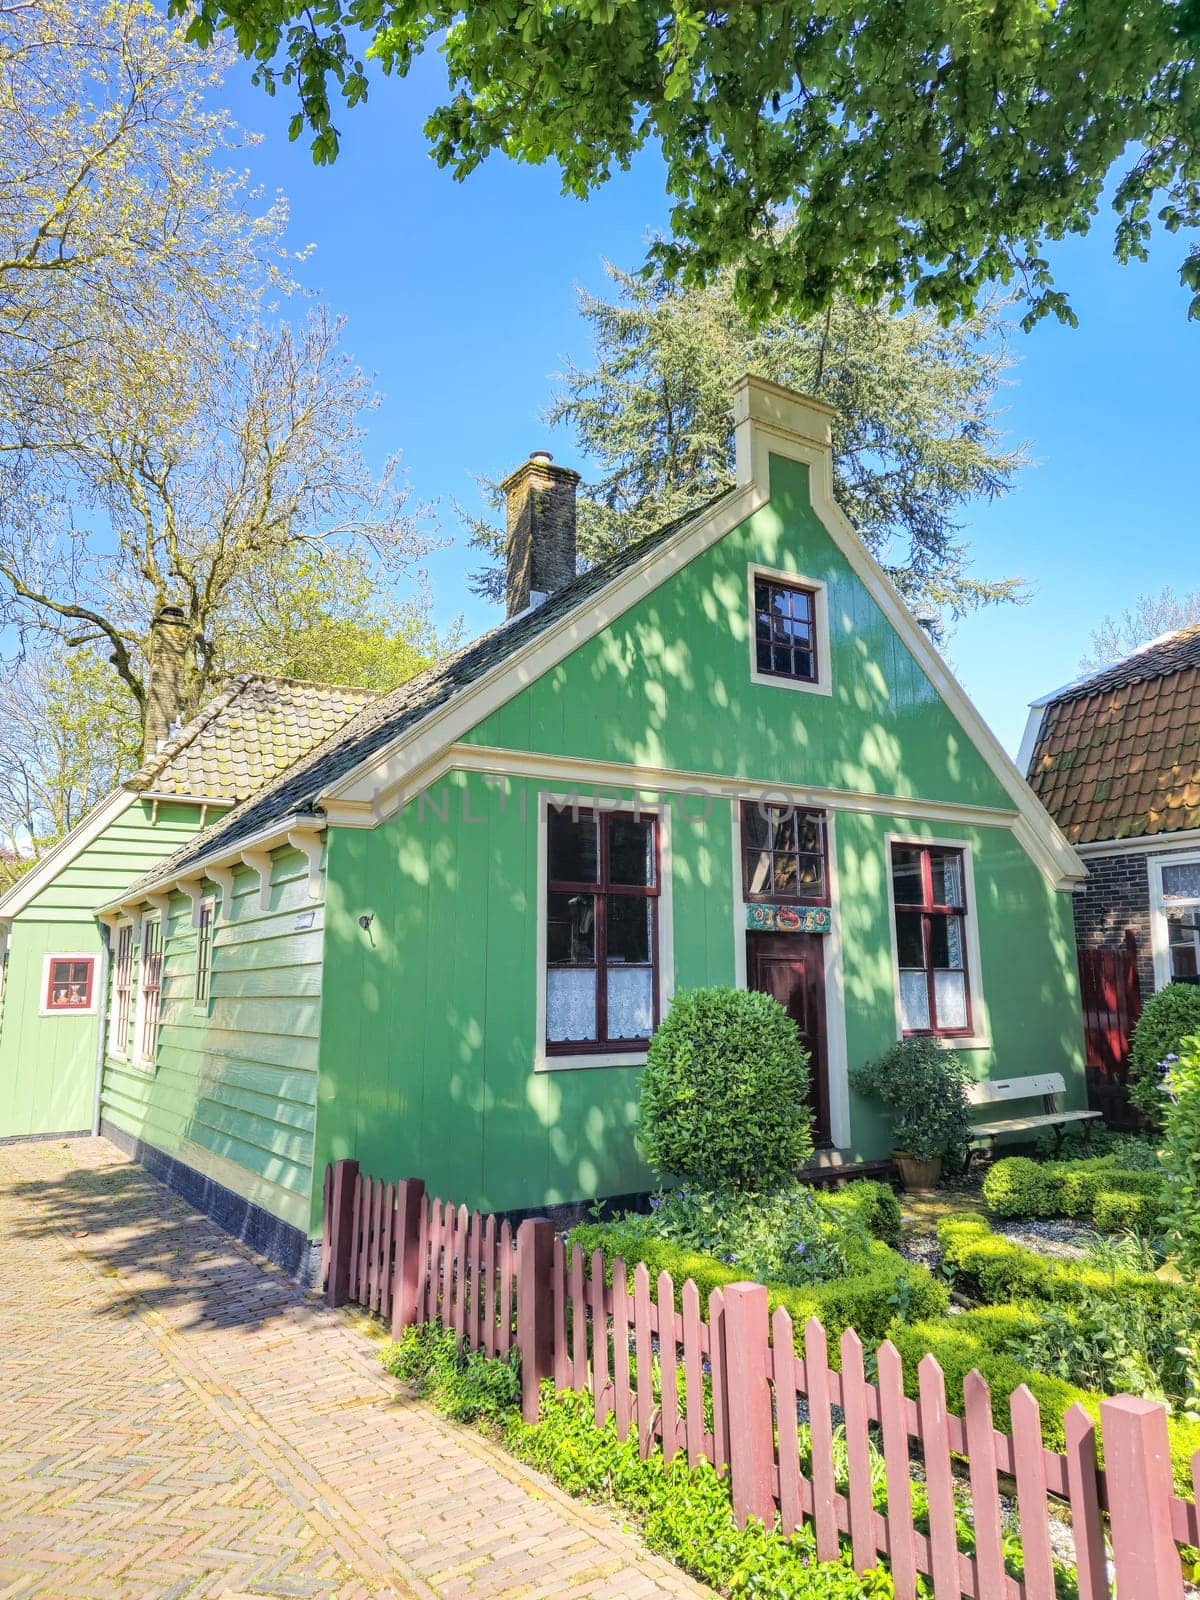 A charming green house stands surrounded by a picket fence, exuding a sense of tranquility and serenity in its quaint setting. Broek in Waterland Netherlands 21 April 2024